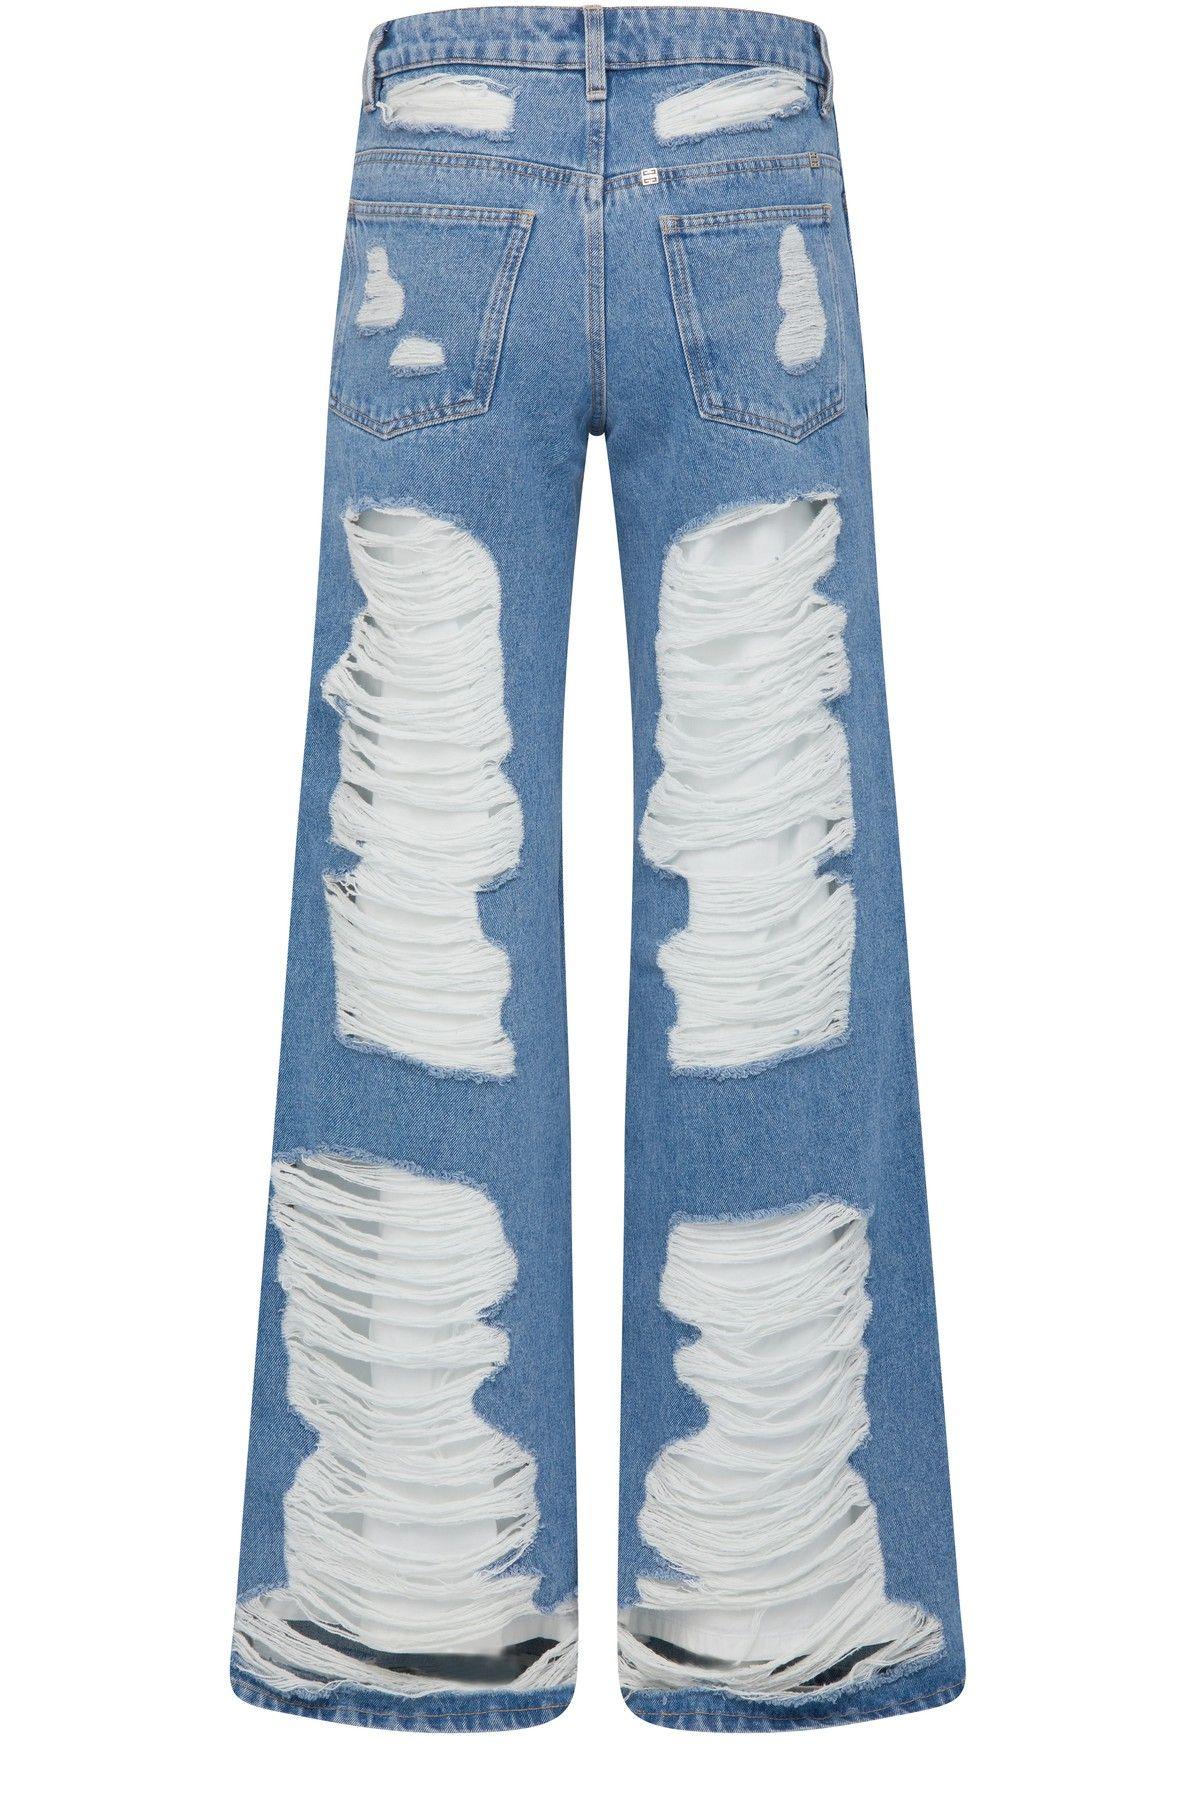 Givenchy Ripped Jeans in Blue | Lyst